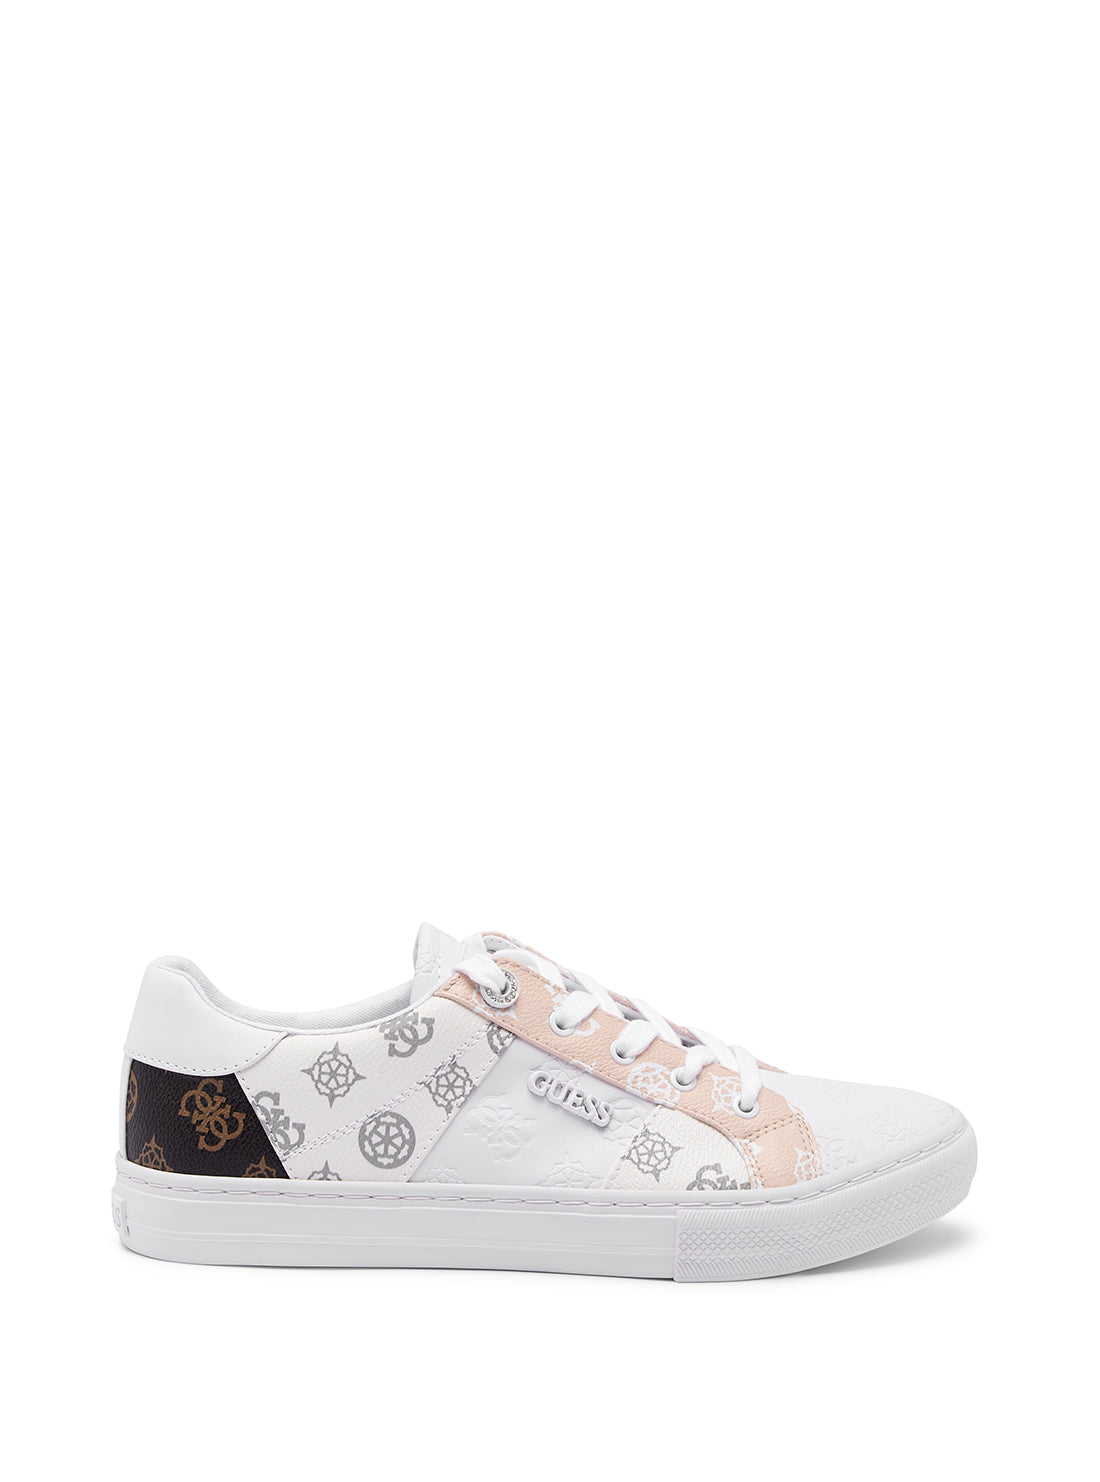 GUESS White Logo Loven Low-Top Sneakers side view